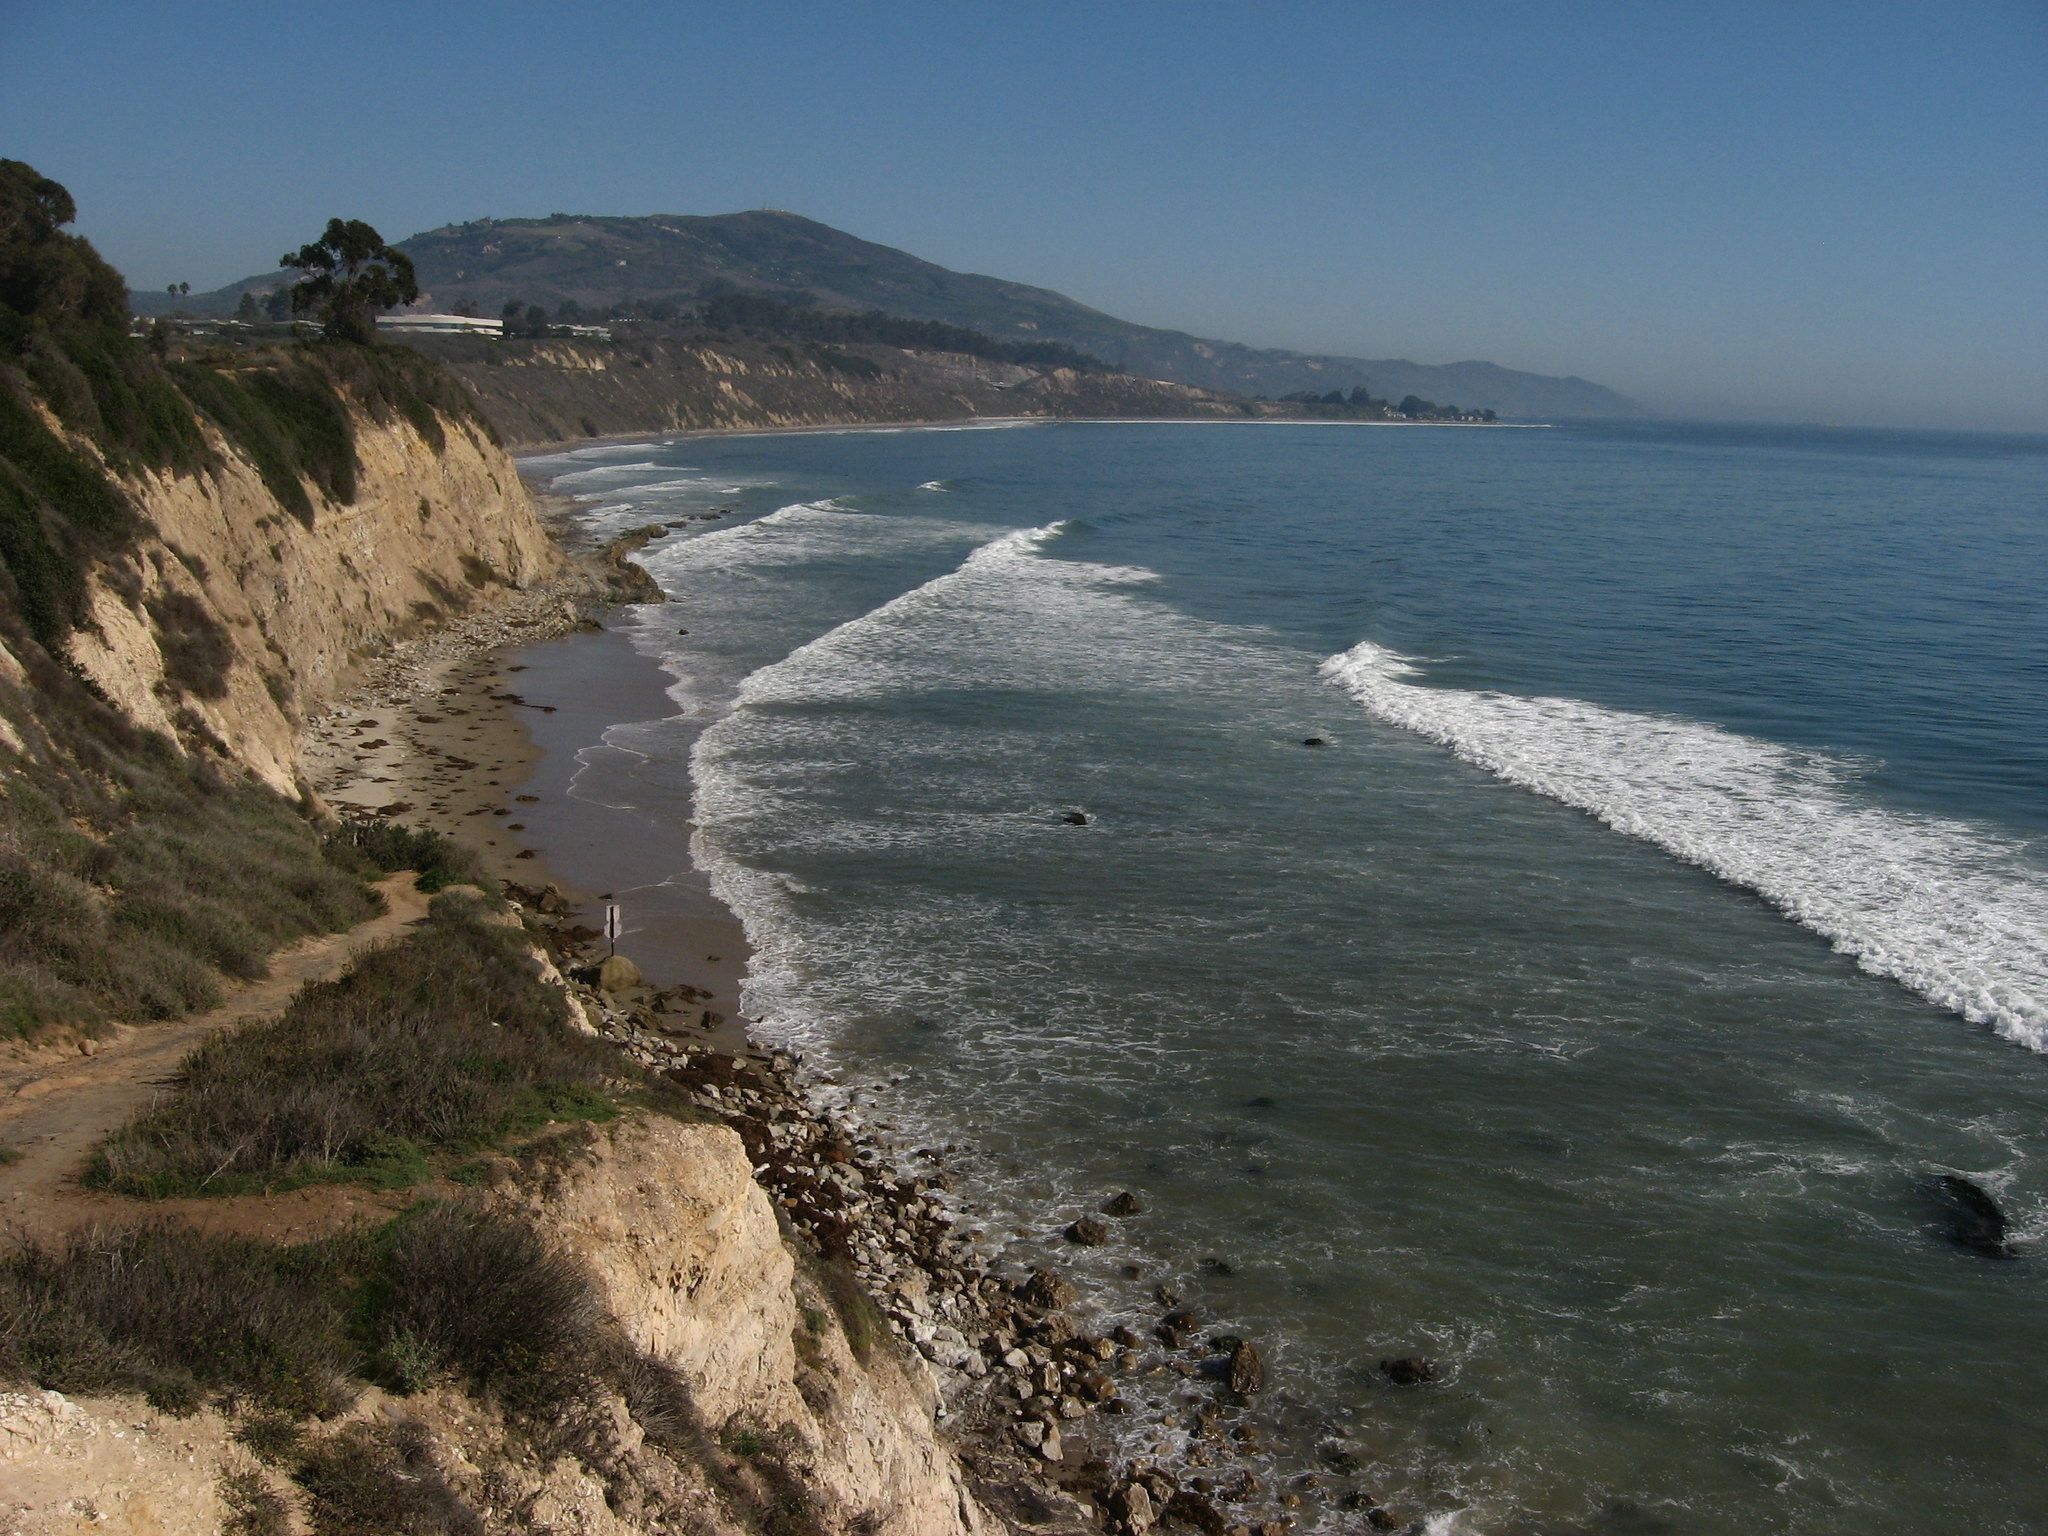 Sand bluffs above the beach and whitecapped ocean waves at Carpinteria Bluffs Nature Preserve in Santa Barbara.